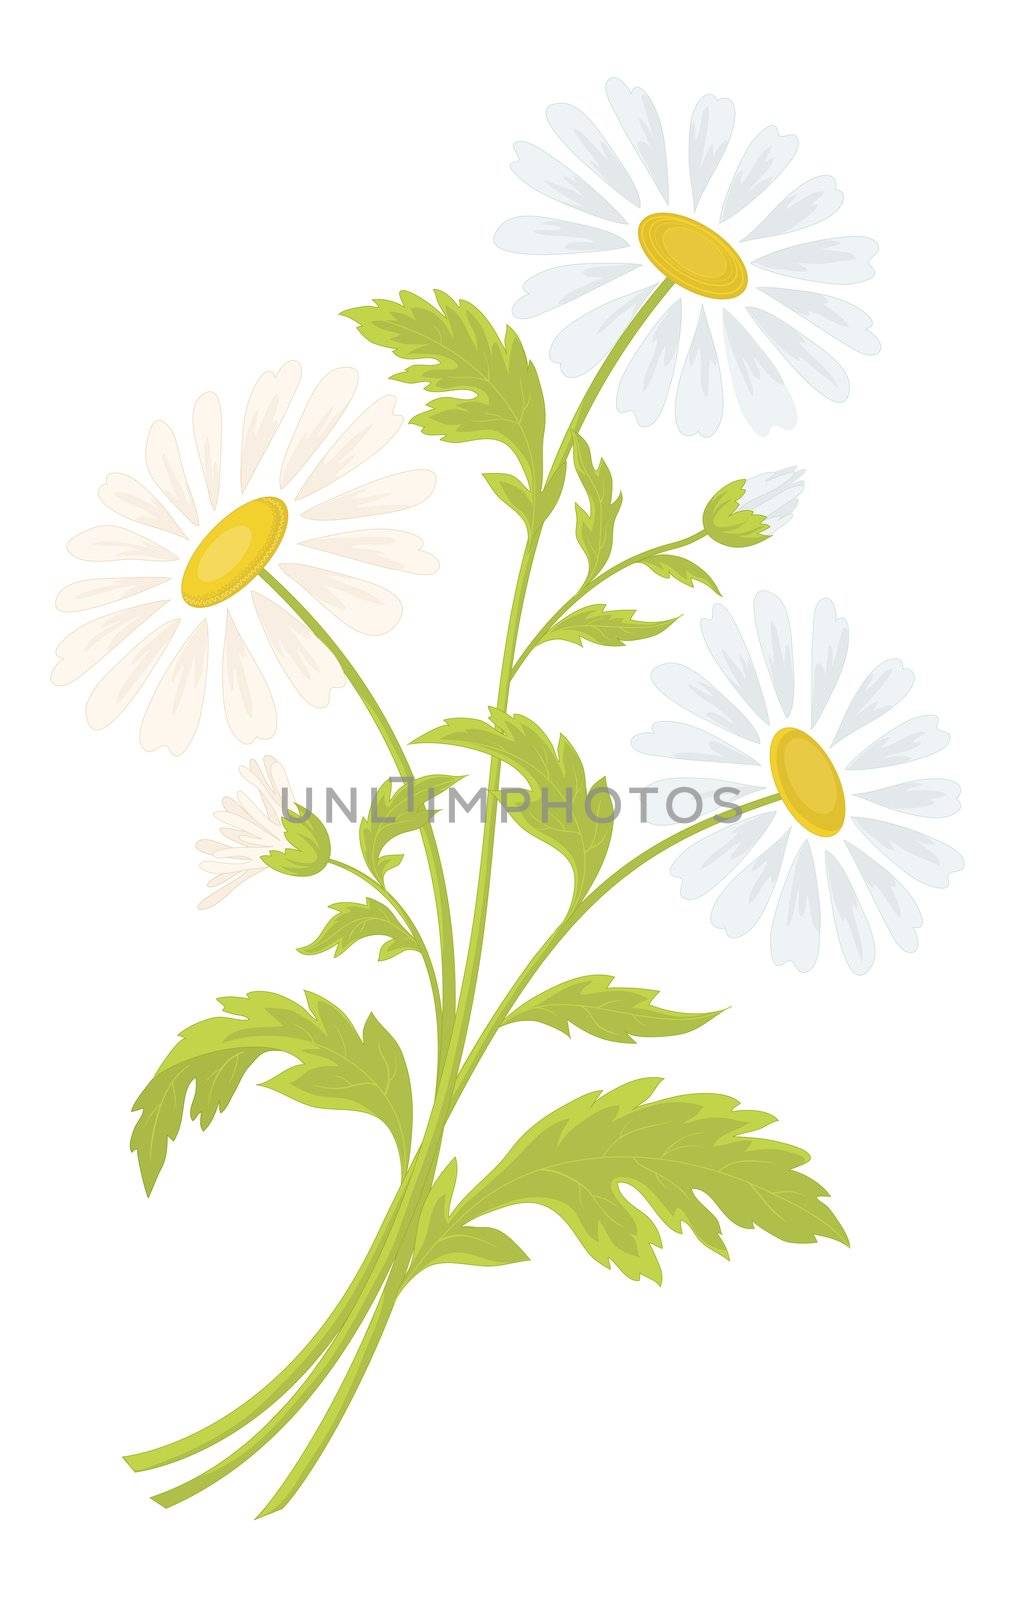 Chamomile flowers by alexcoolok